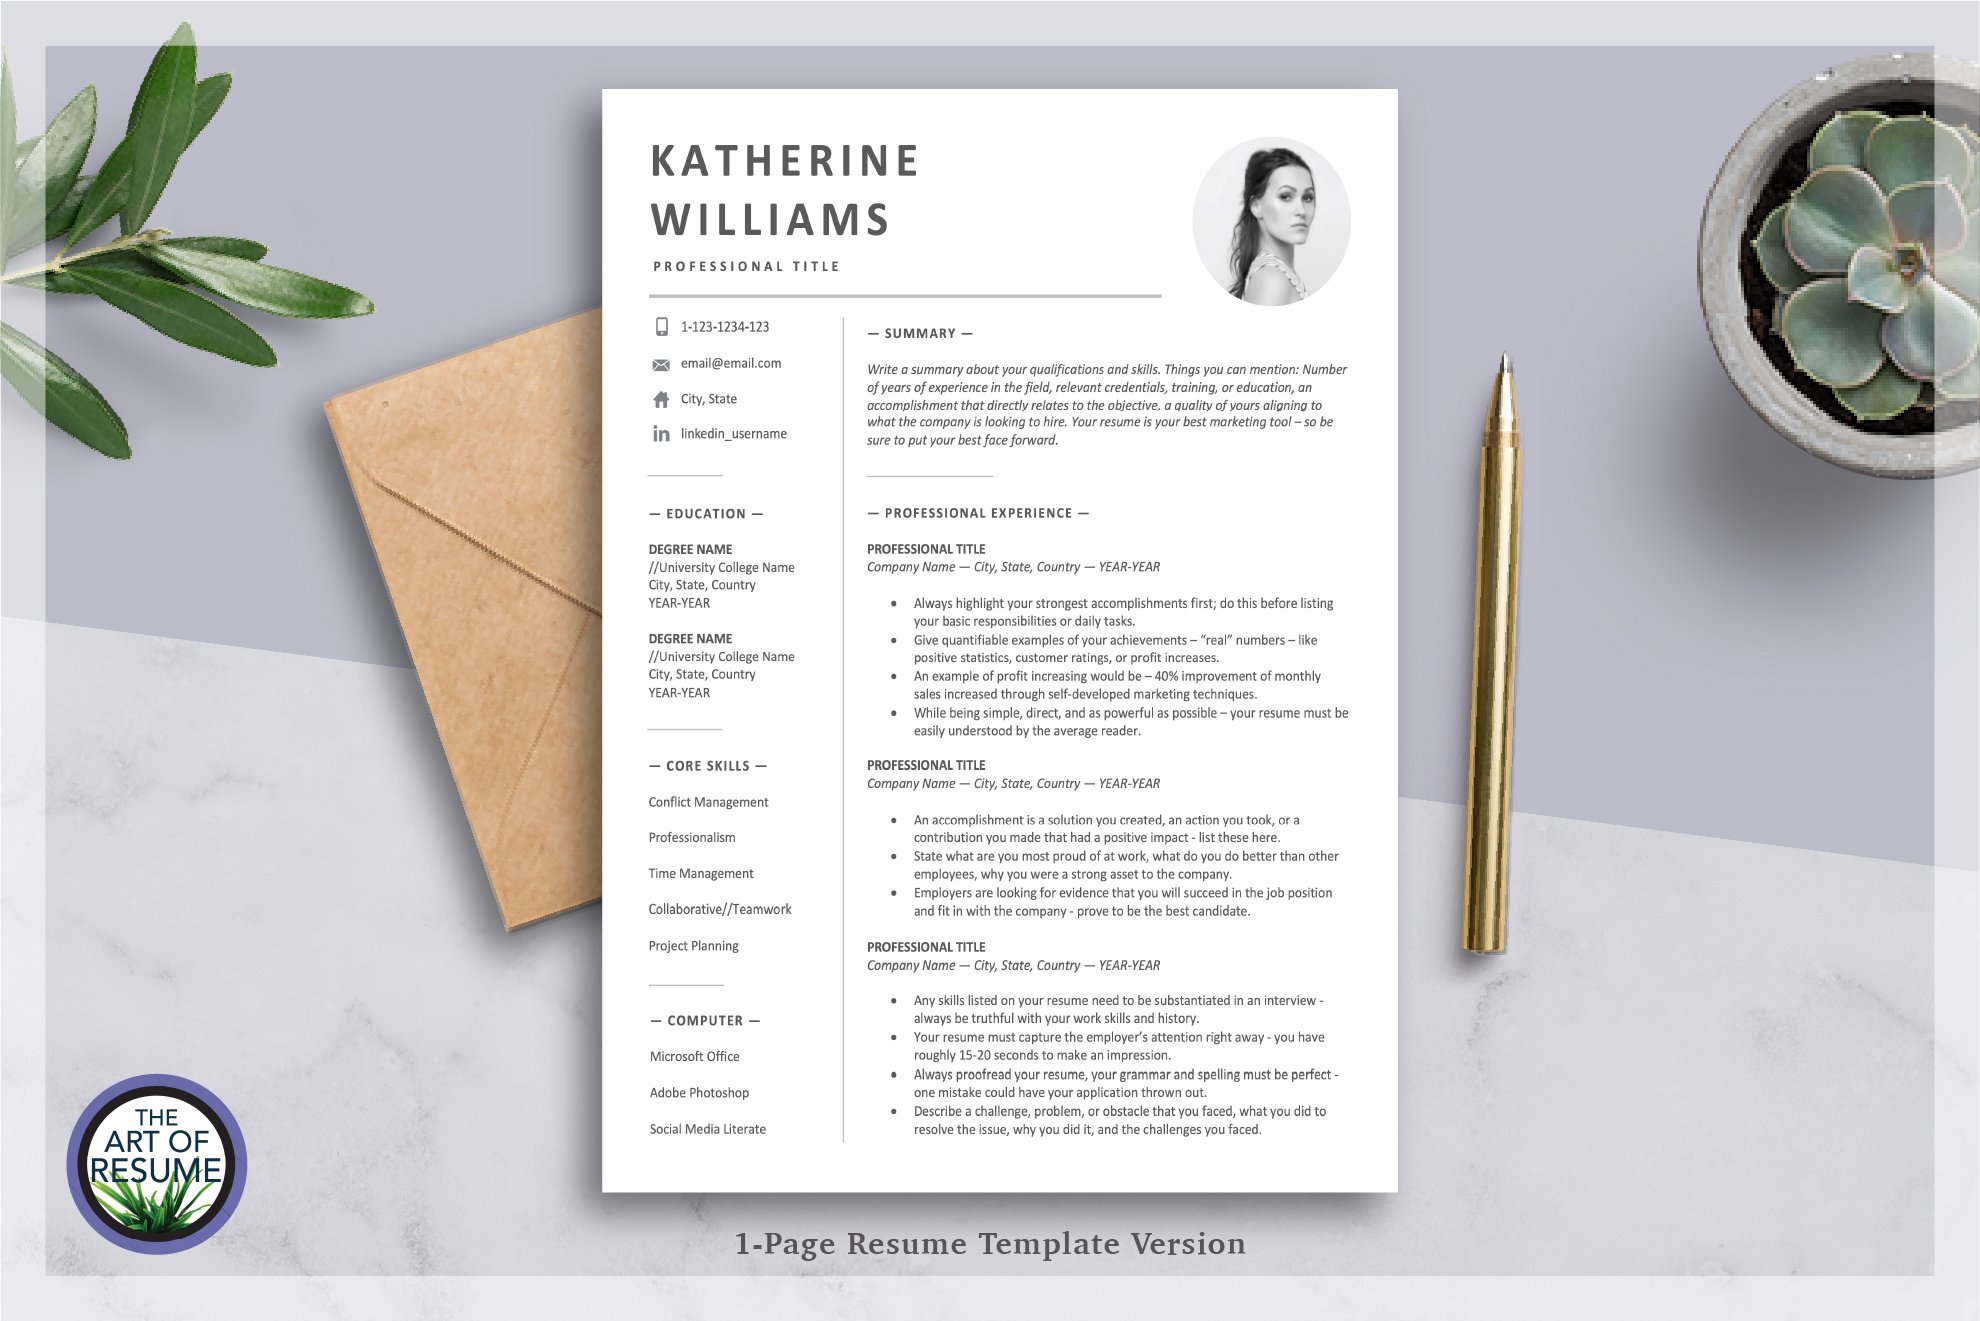 Resume Design + Photo Picture Insert preview image.